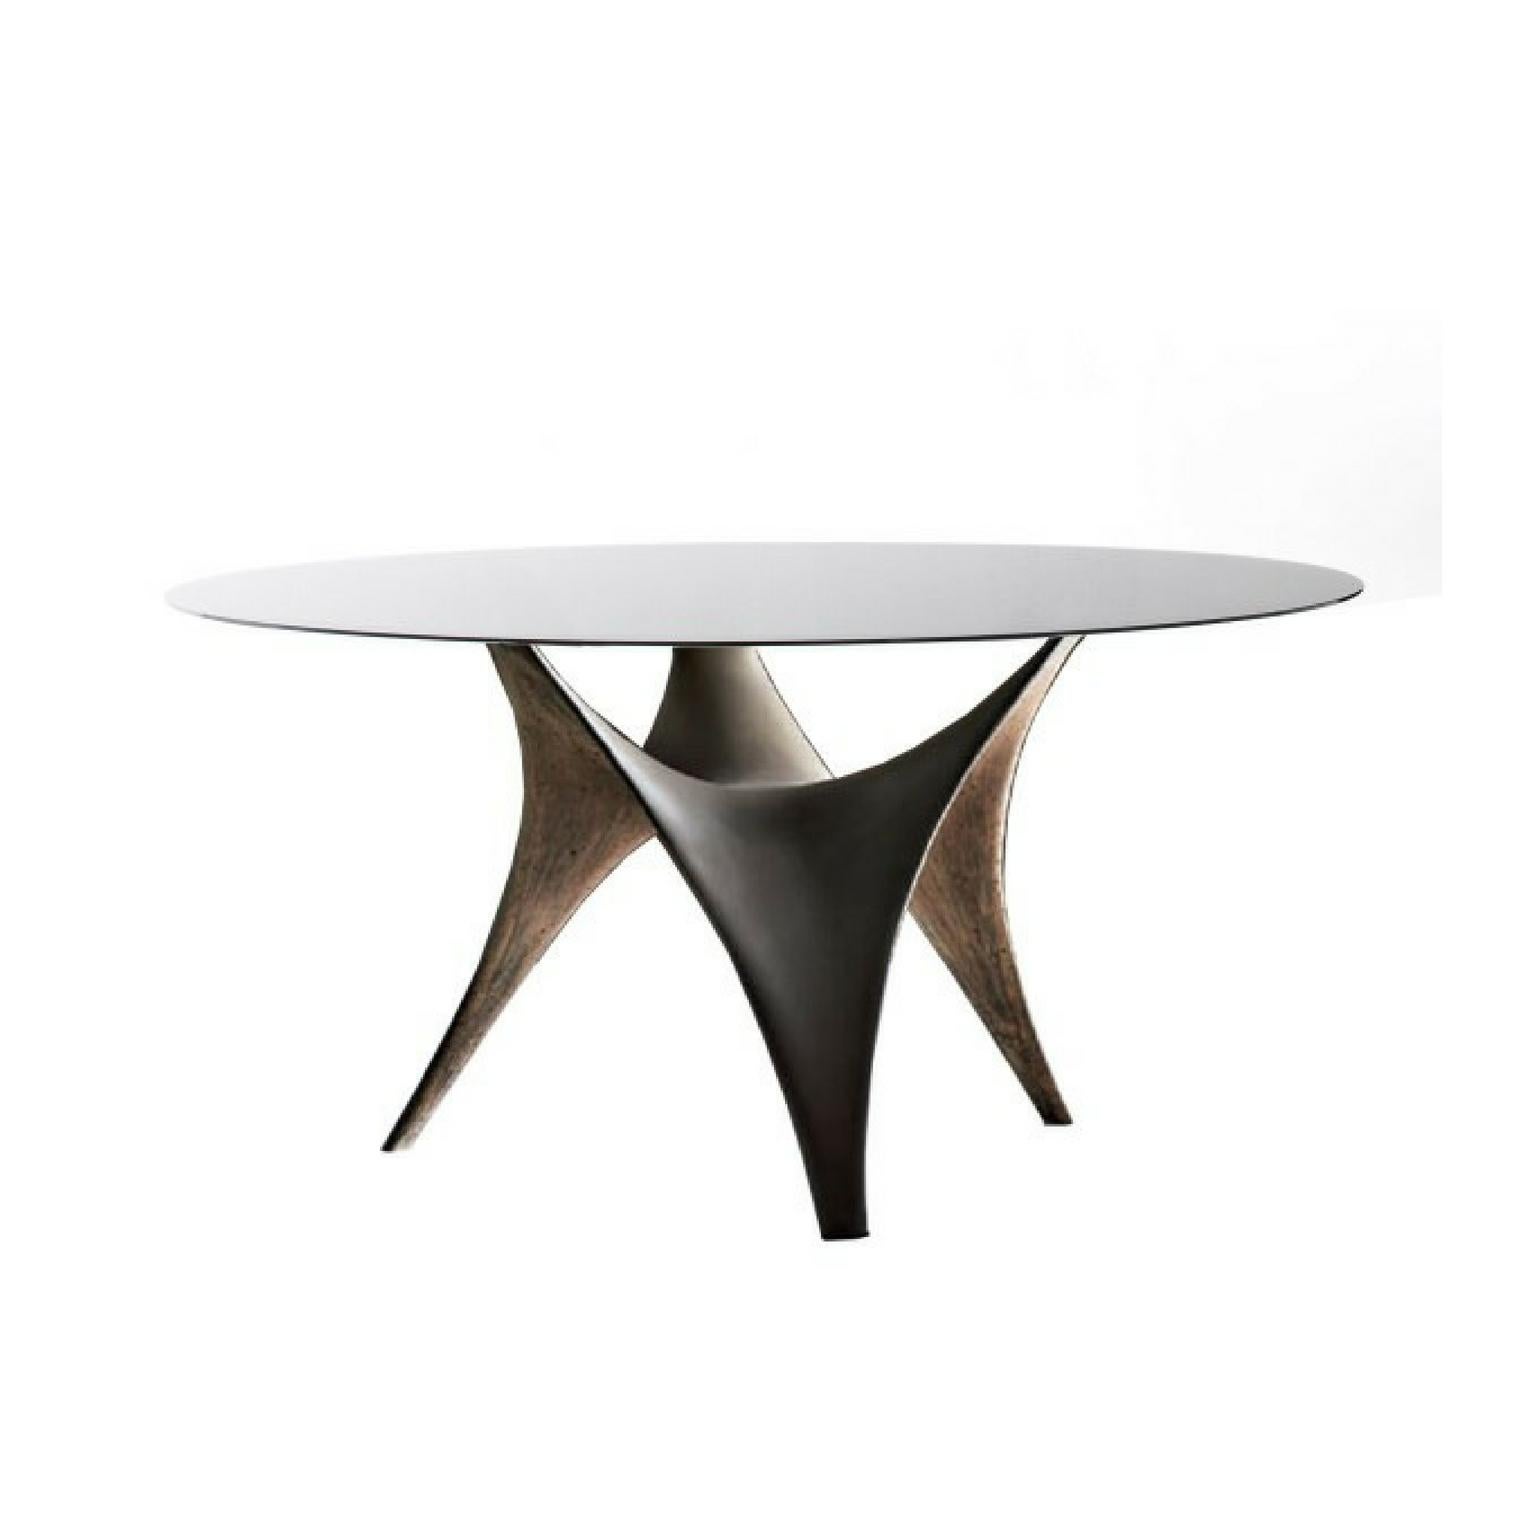 The table Arc embodies the innovative concepts which distinguish it. The base shape is inspired by the techno structures currently used in modern building: a new “light” cement which mixes color and a special fibrous material obtaining resistant